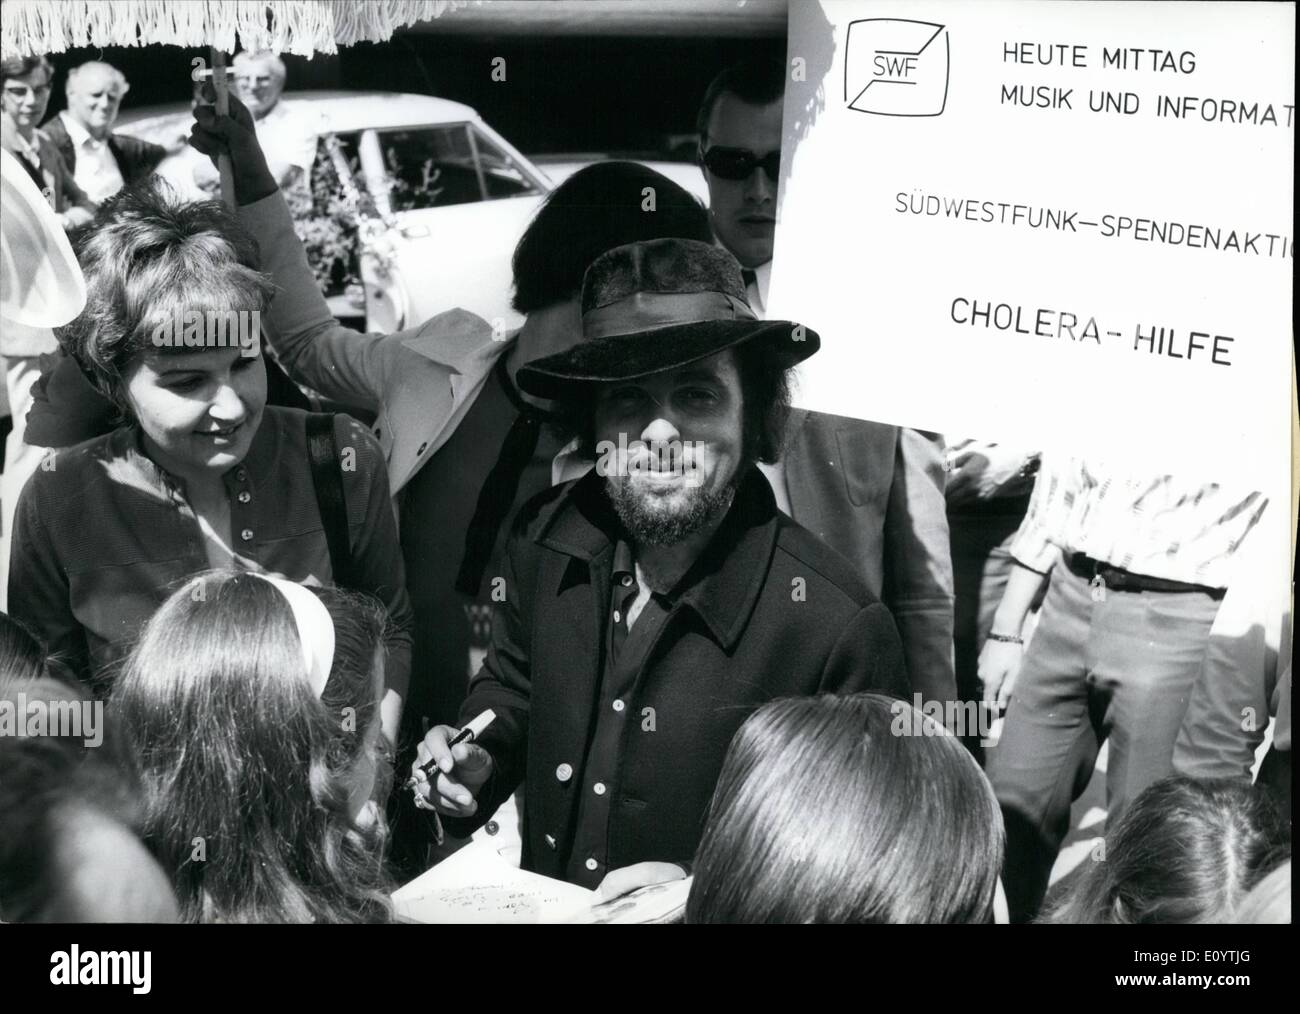 Jun. 06, 1971 - Autographs for the benefit of the Cholera Victims of the Pakistani war sold the French Singer Daniel Gerard at the Baden-Baden ''Flea market''. Surrounded by hundreds of fans he sold thousands of singles with his new song ''Butterfly'' after singing them. His German record company spent the singles for the auction. Stock Photo